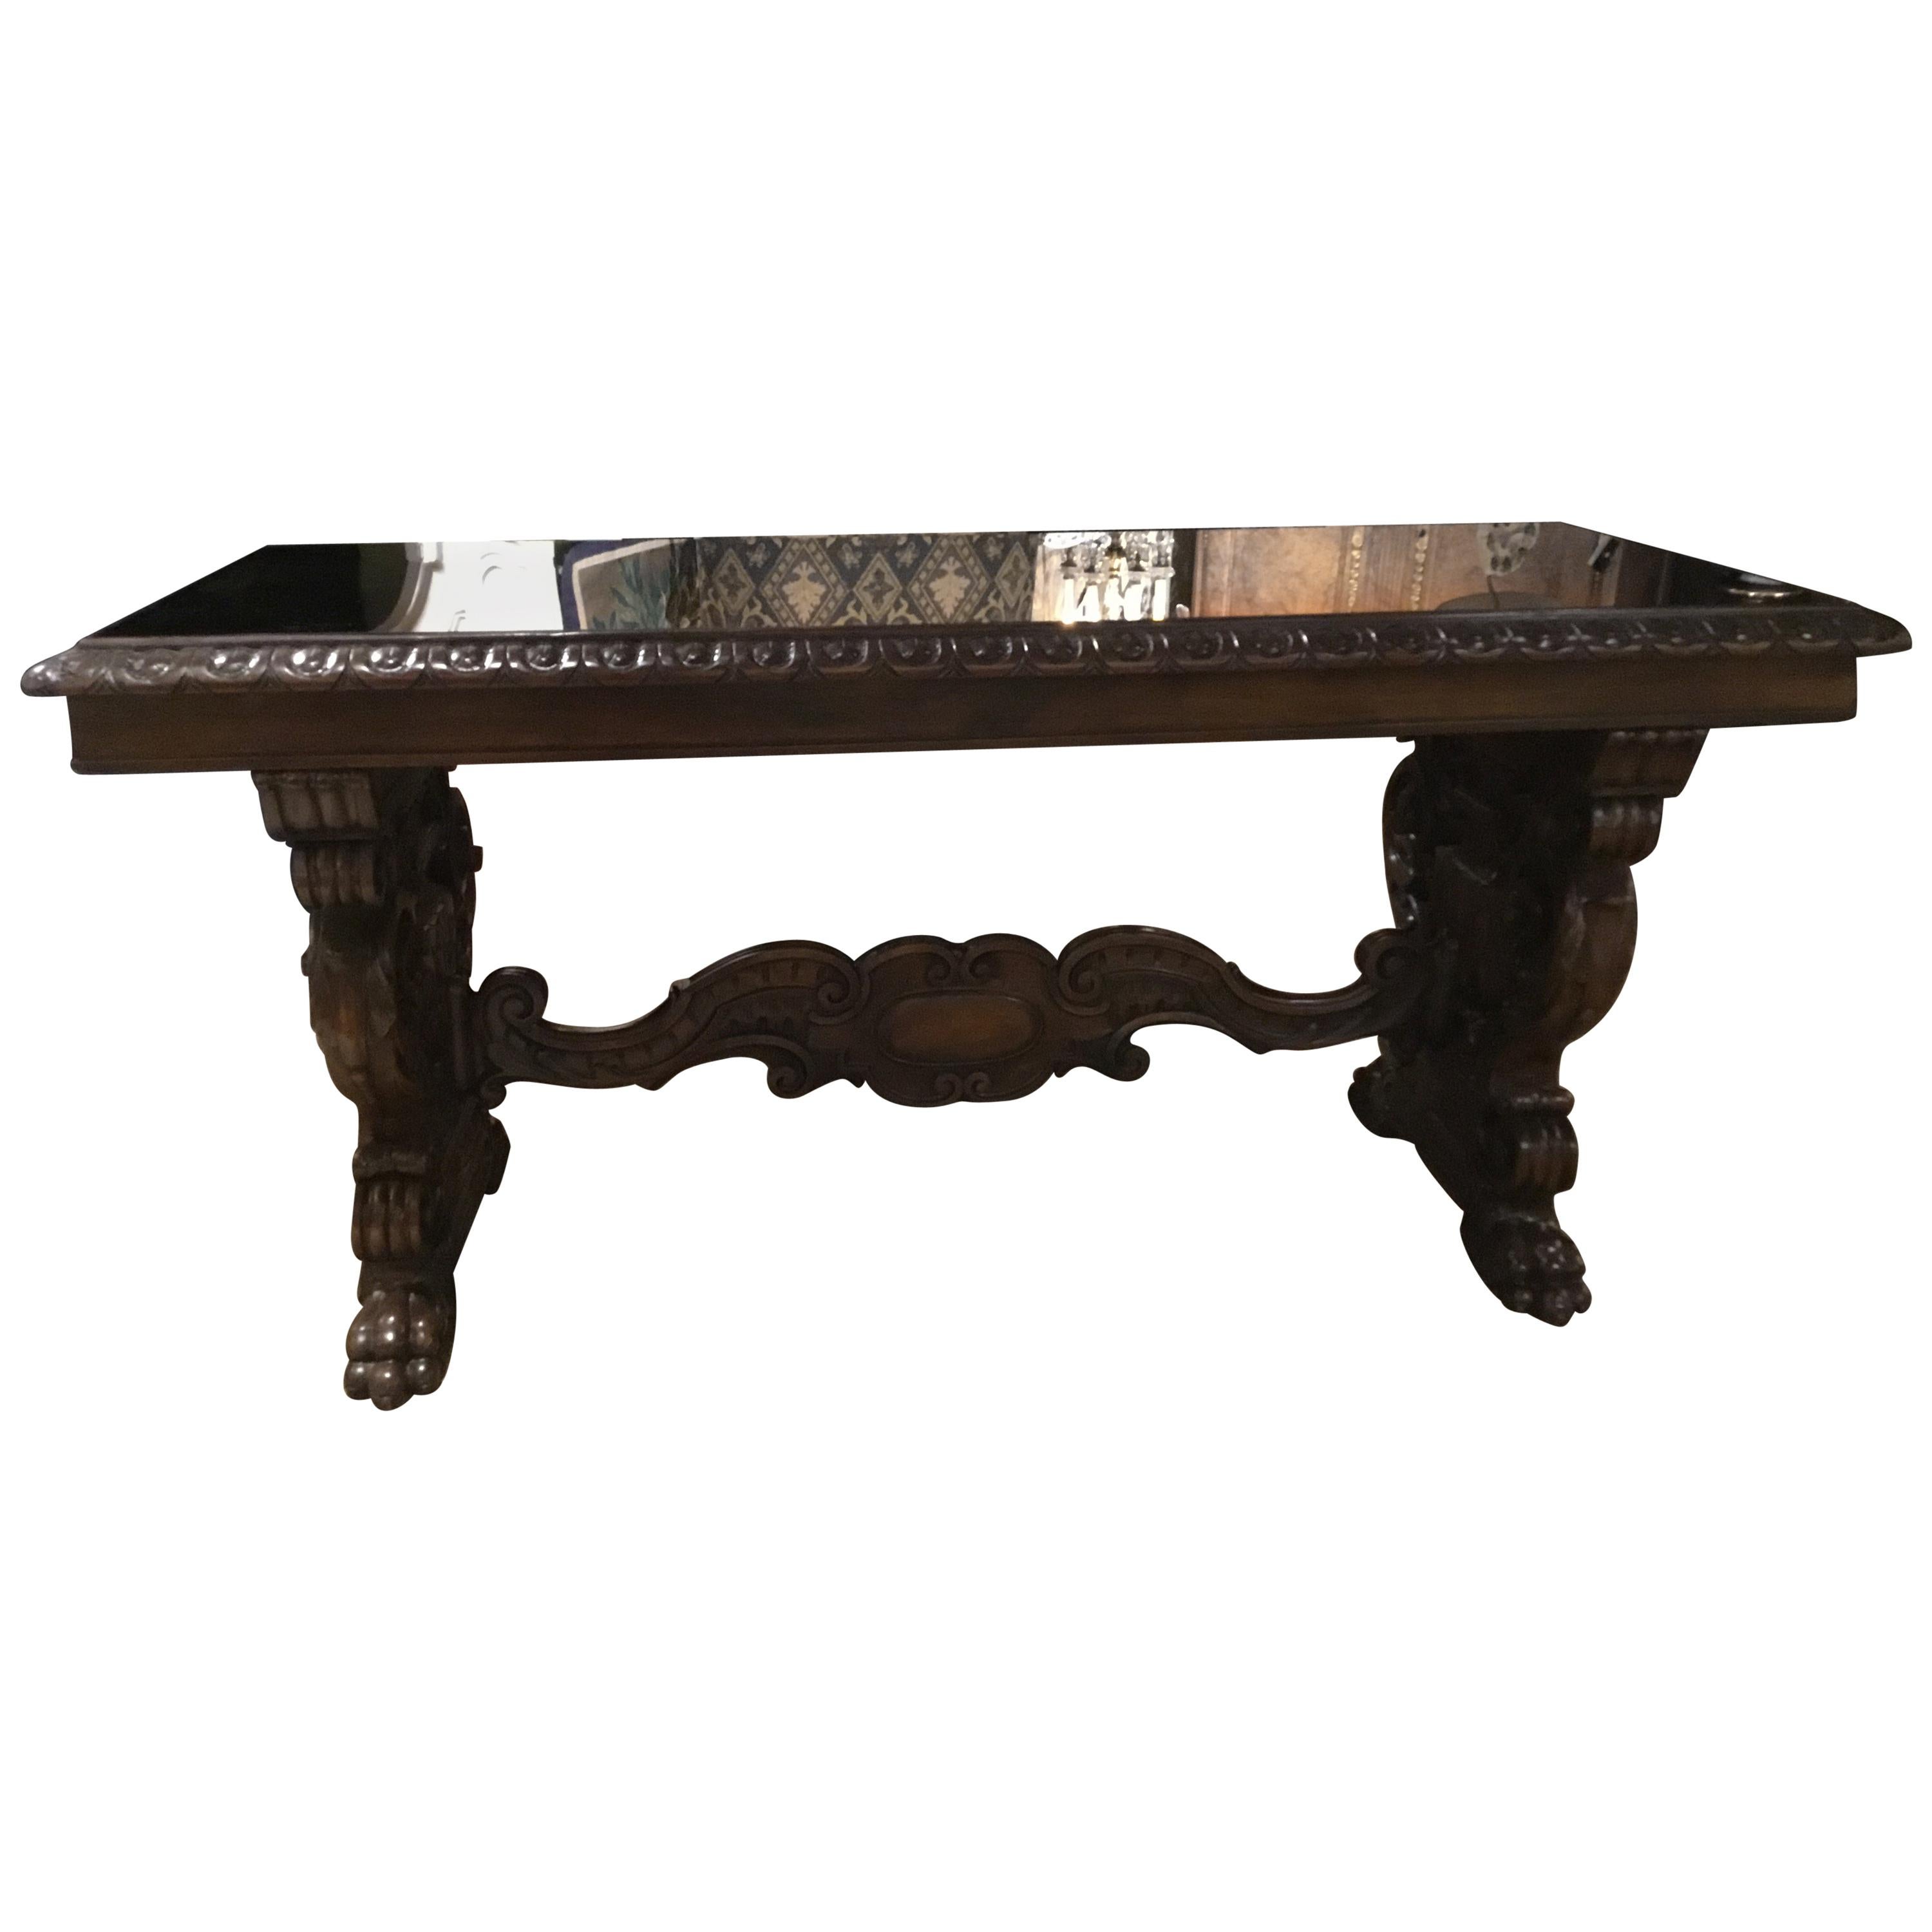 Spanish Console Table in Carved Dark Walnut with Mirrored Top